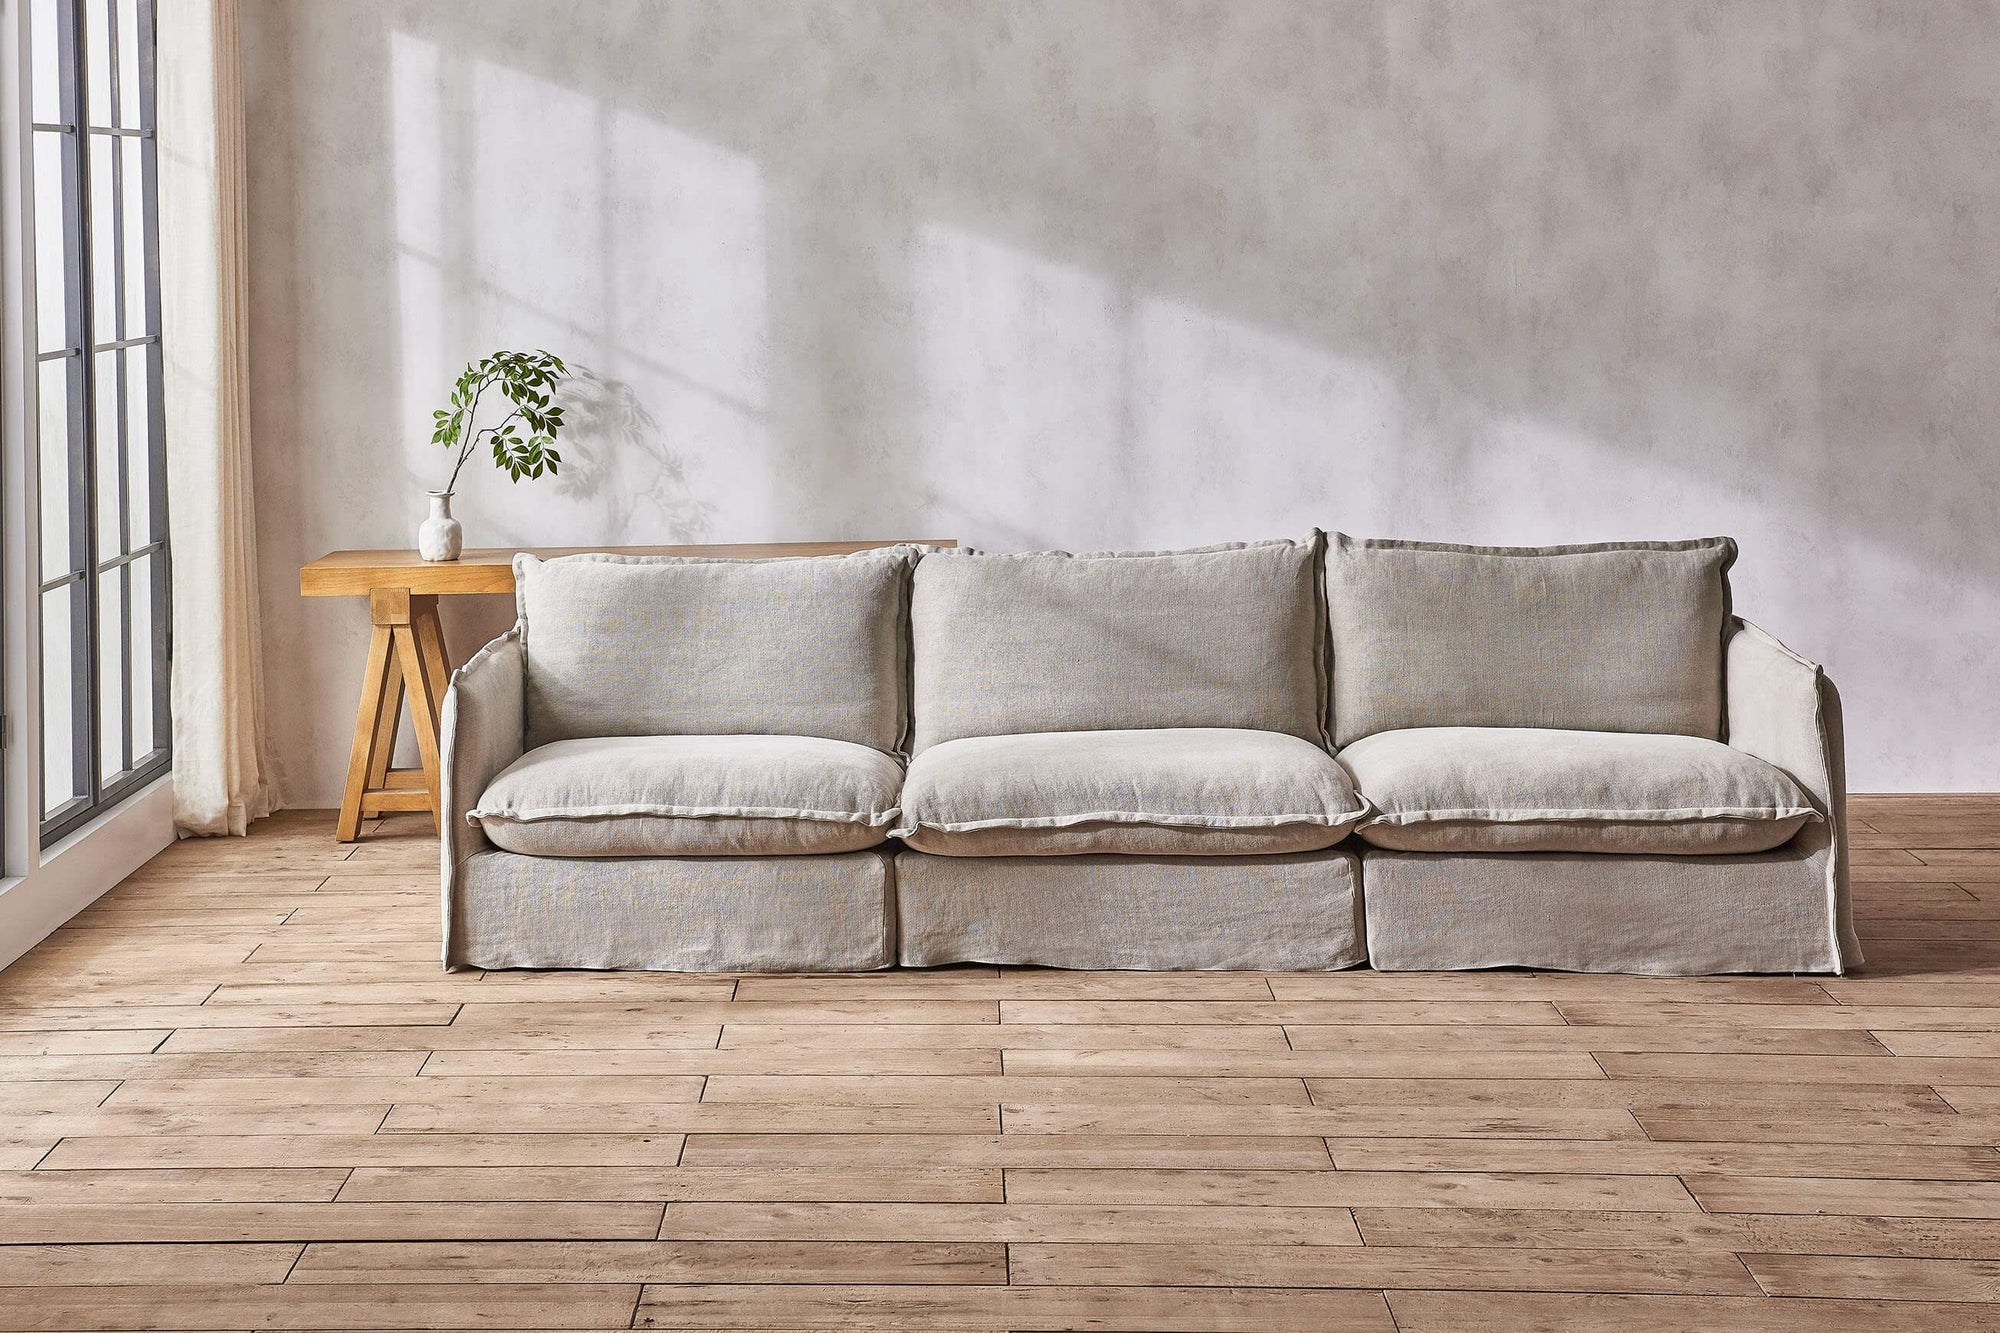 Neva Sectional Sofa in Jasmine Rice, a light warm greige Medium Weight Linen, placed in a sunlit room next to a window